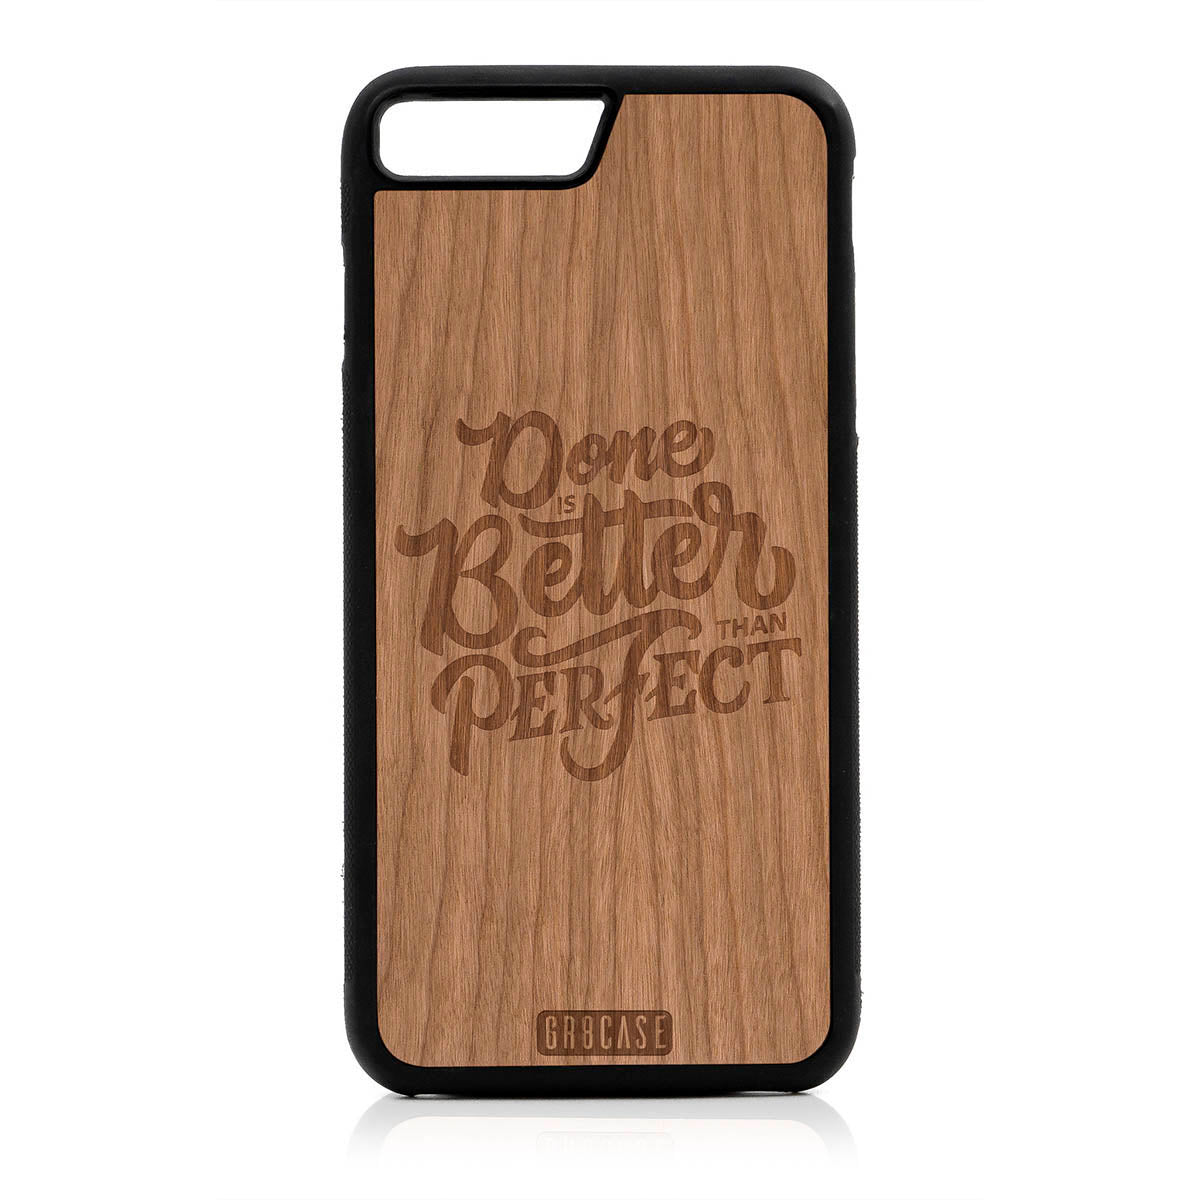 Done Is Better Than Perfect Design Wood Case For iPhone 7 Plus / 8 Plus by GR8CASE